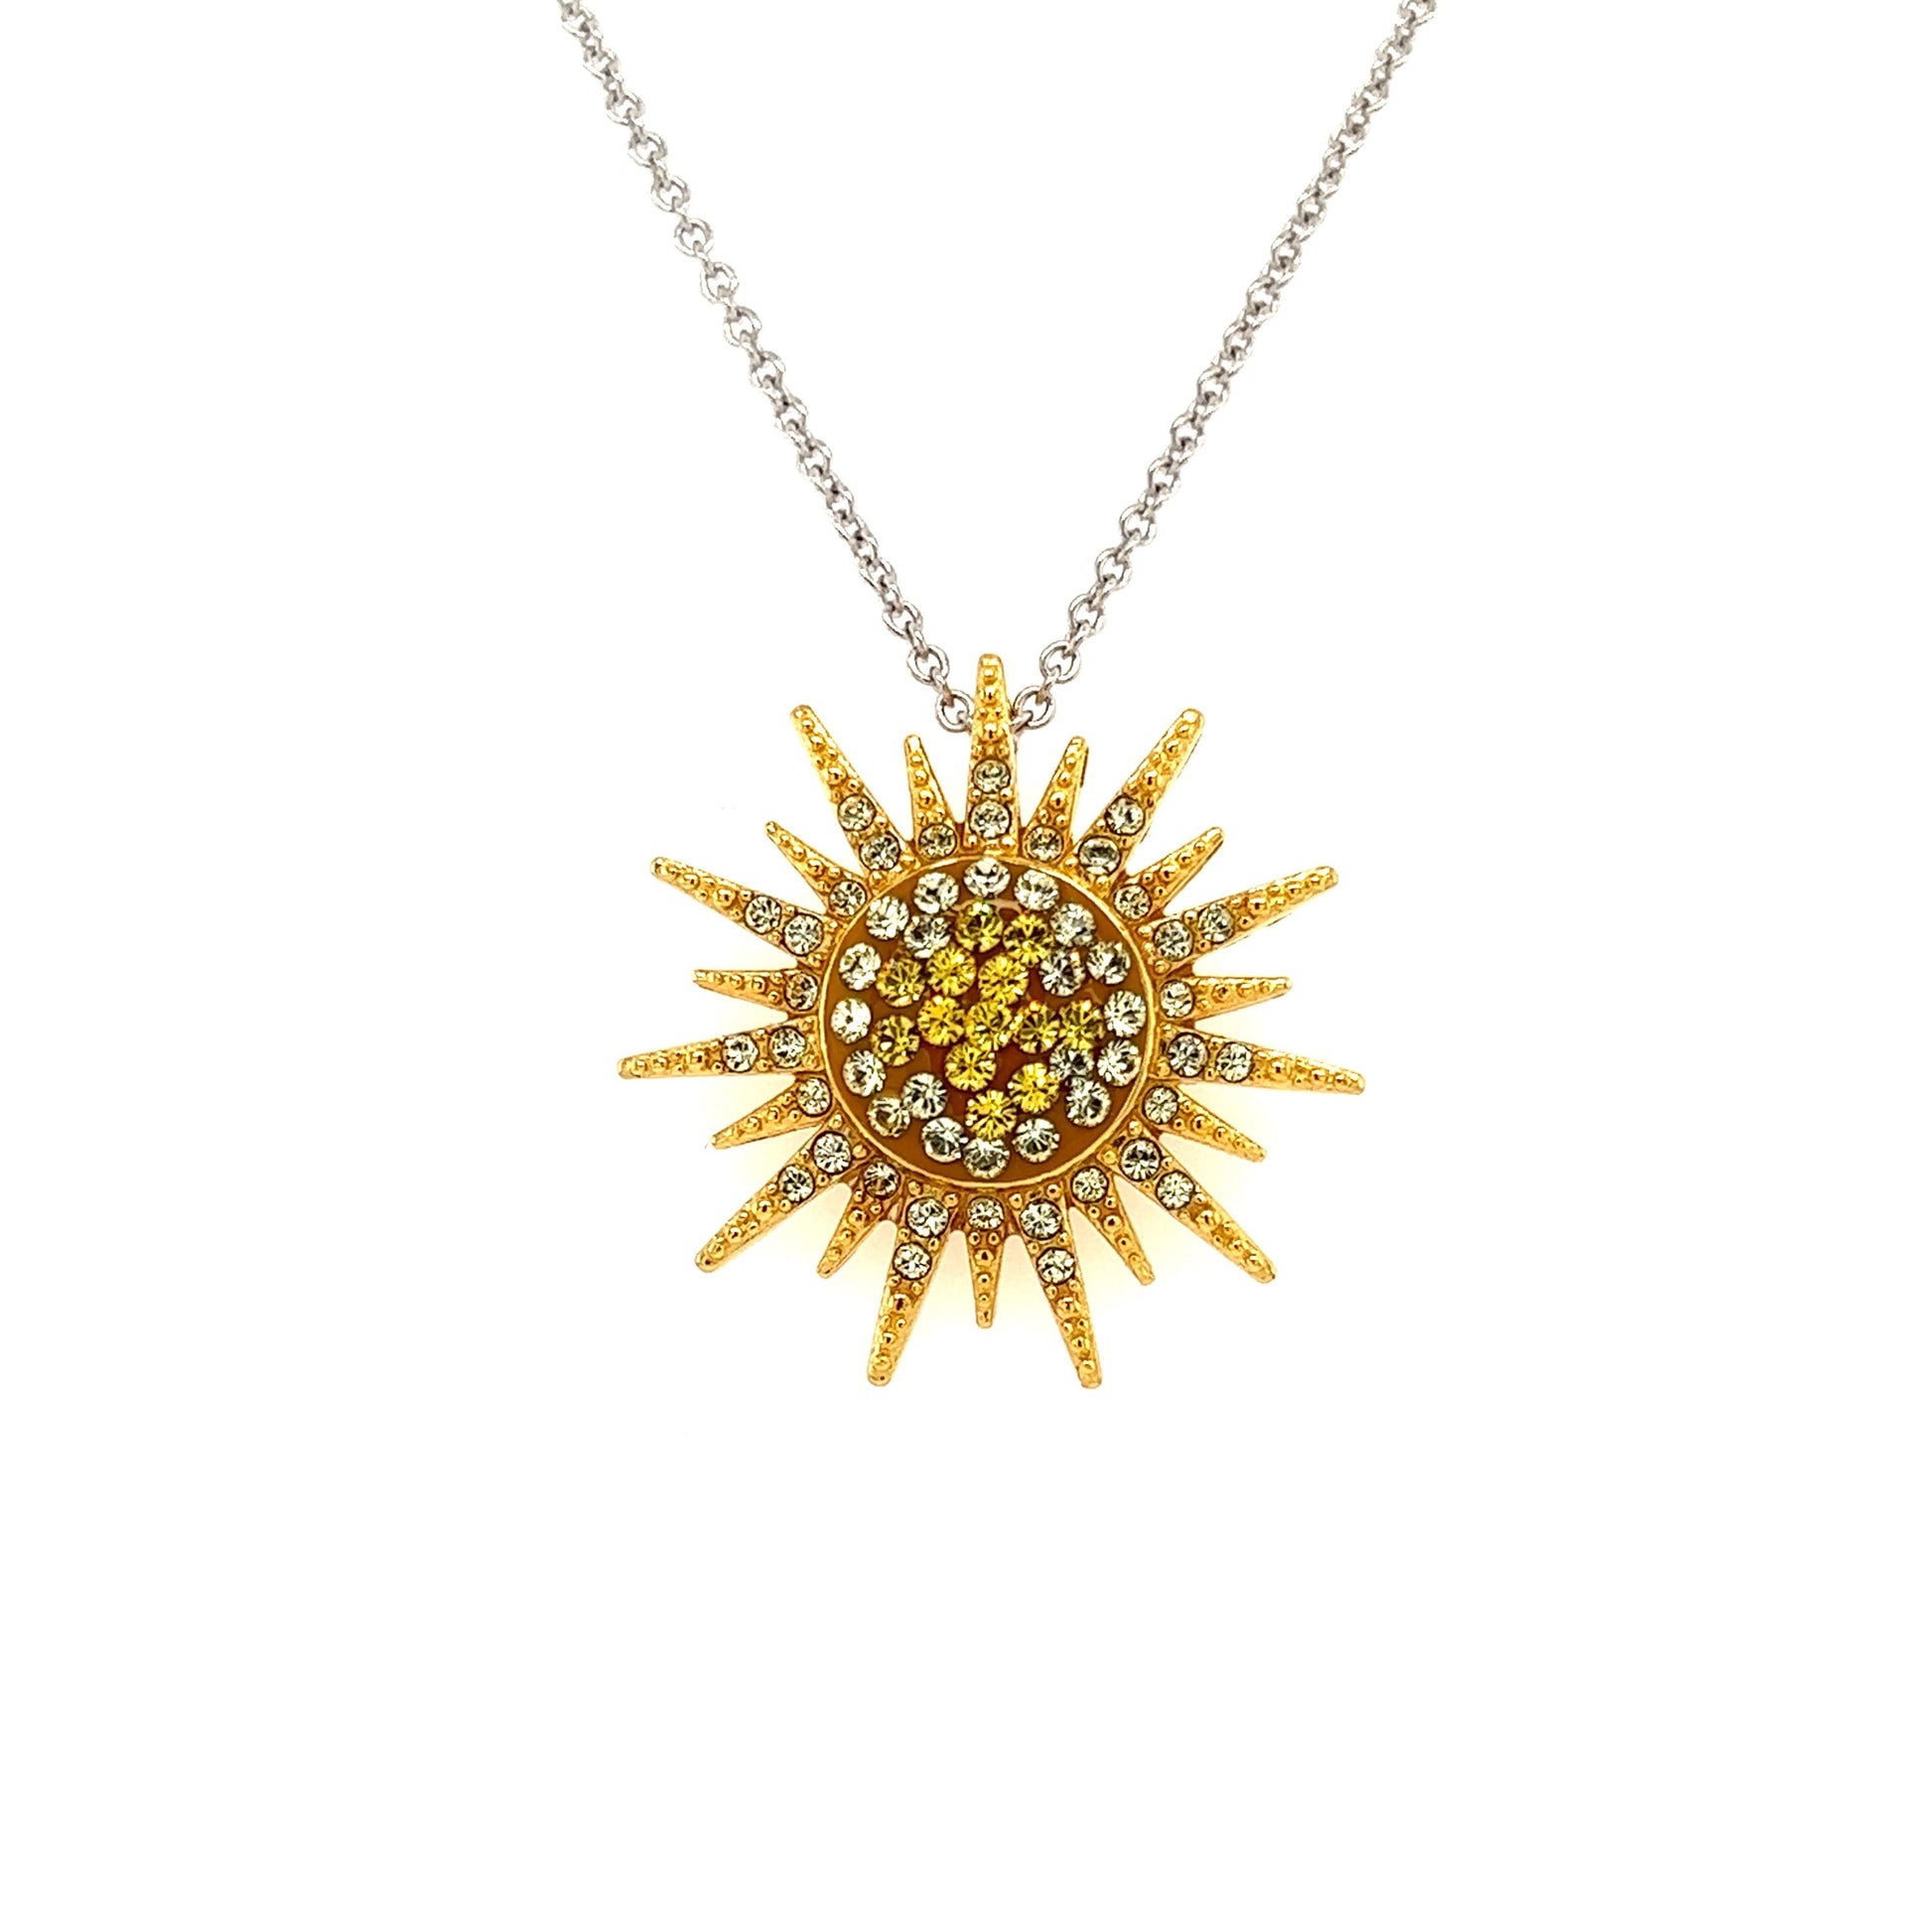 Sunburst Necklace With Yellow and White Crystals in Sterling Silver Pendant View